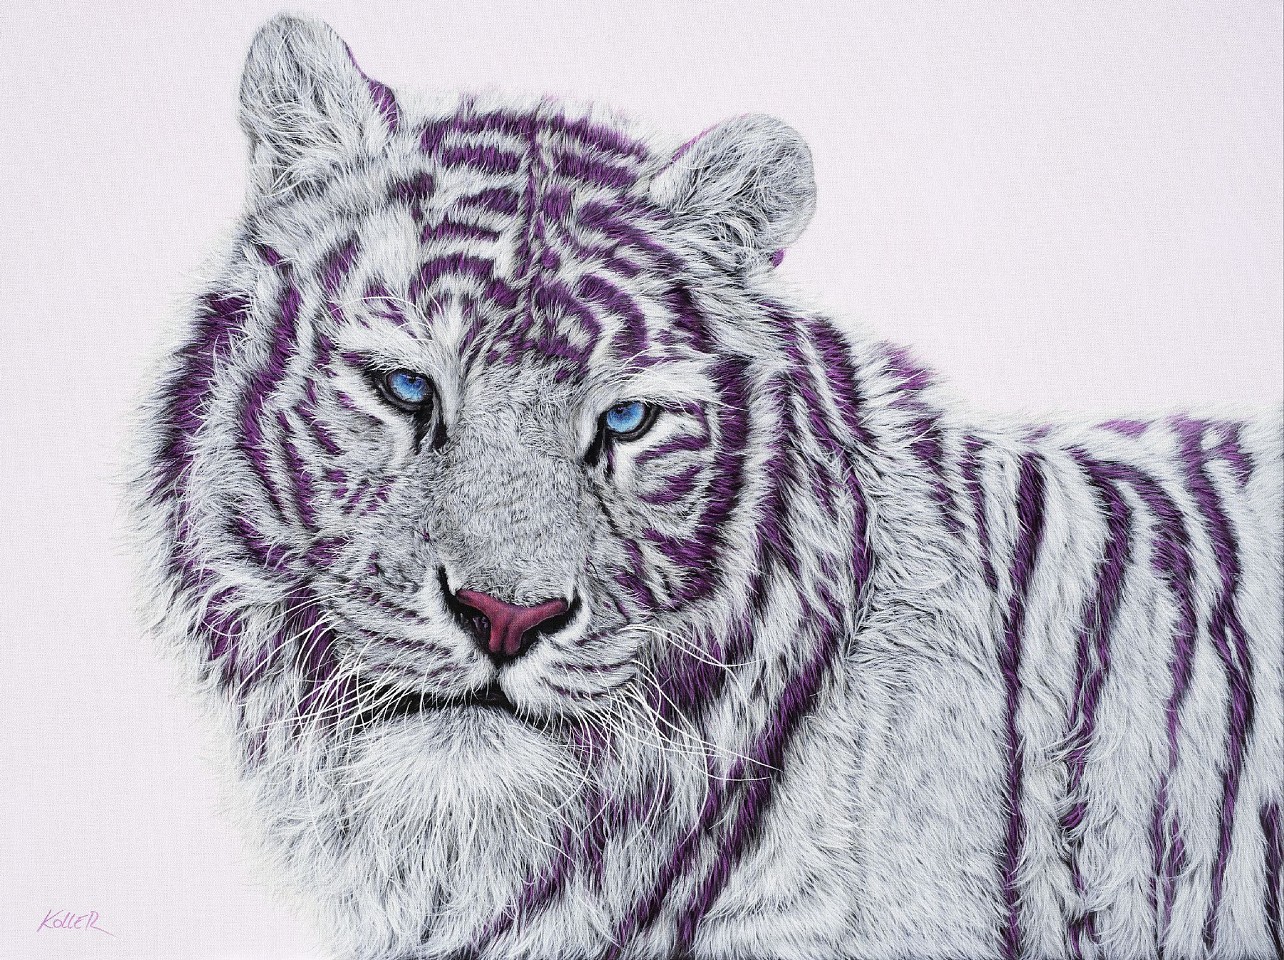 Helmut Koller, Tiger with Magenta Stripes, 2019
acrylic on canvas, 36 x 48 in. (91.5 x 122 cm)
HK230306